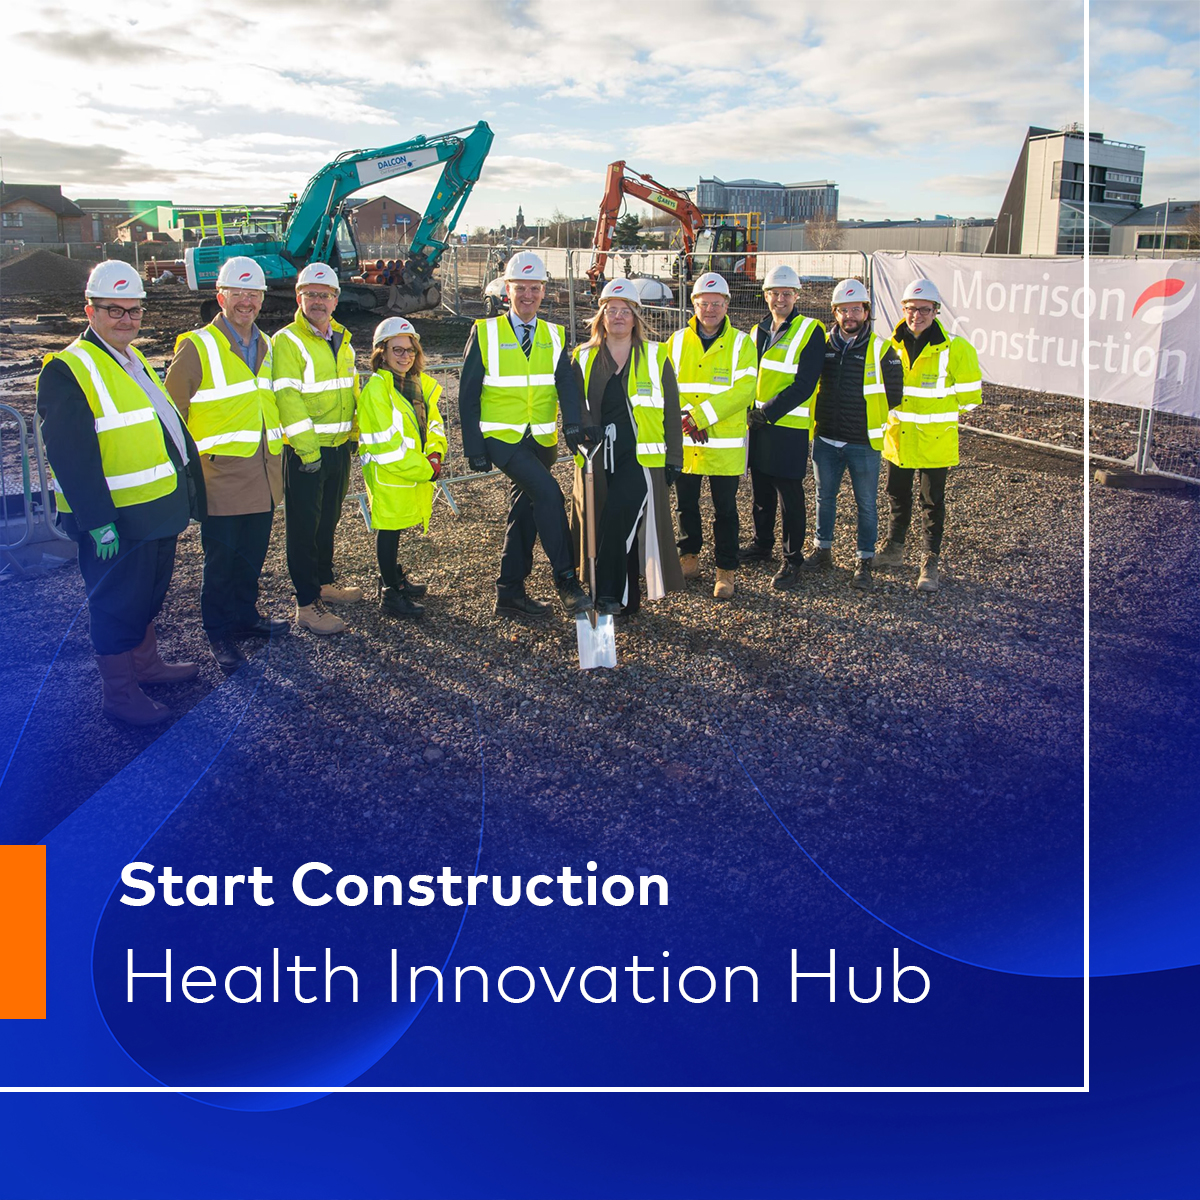 Breaking Ground Milestone Celebrated at the Health Innovation Hub, Marking the Start of Construction on Site in Glasgow. 🚧🏗️ Read full article kadans.co.uk/health-innovat…